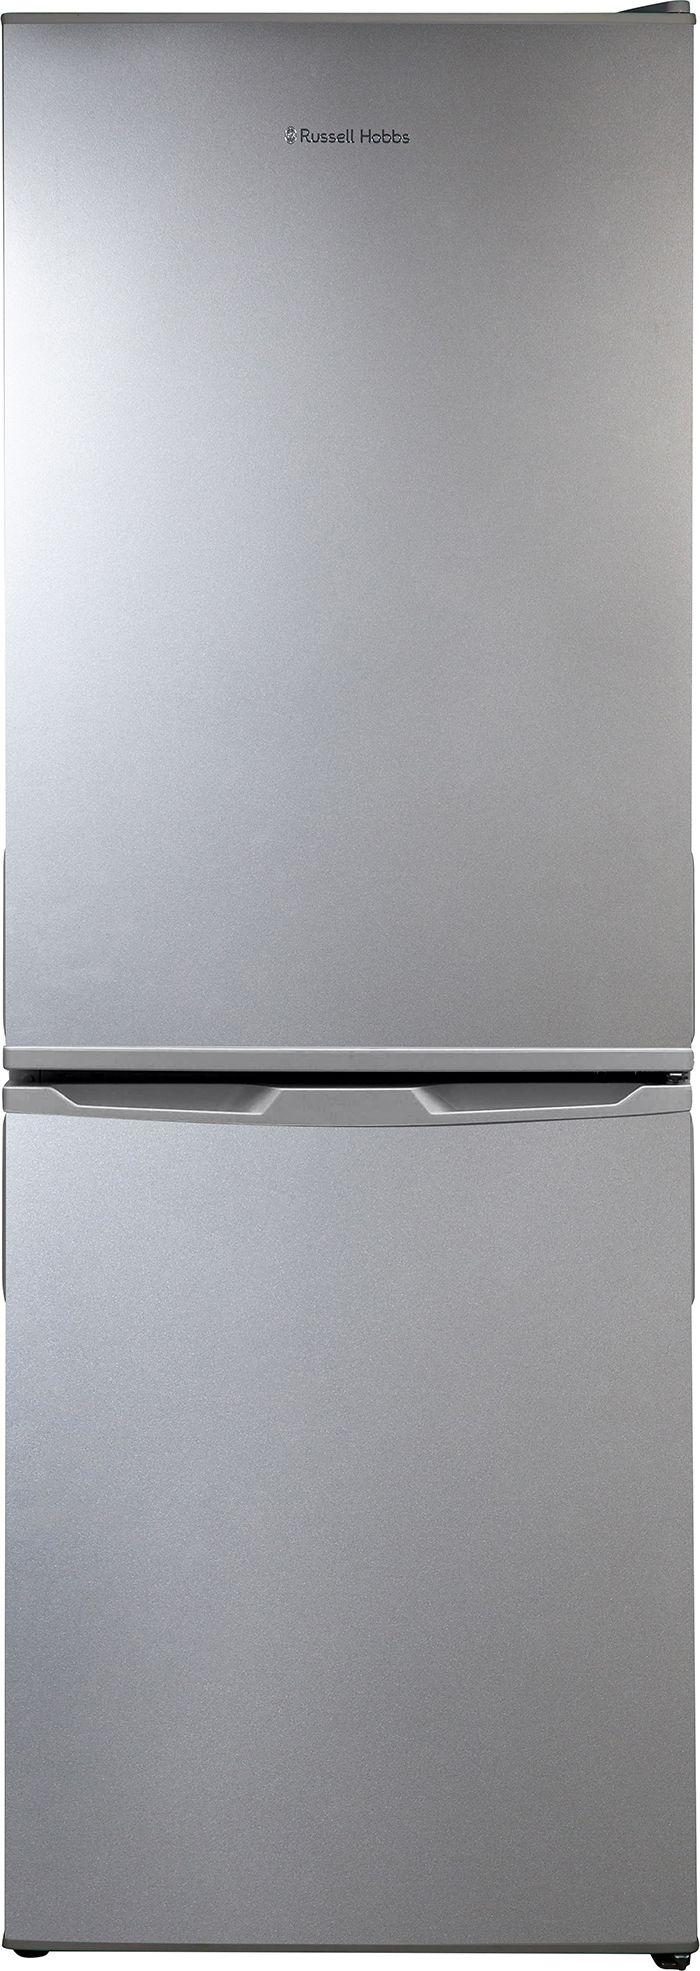 Russell Hobbs RH145FF501E1S Compact 145cm High 60/40 Fridge Freezer - Silver - E Rated, Silver